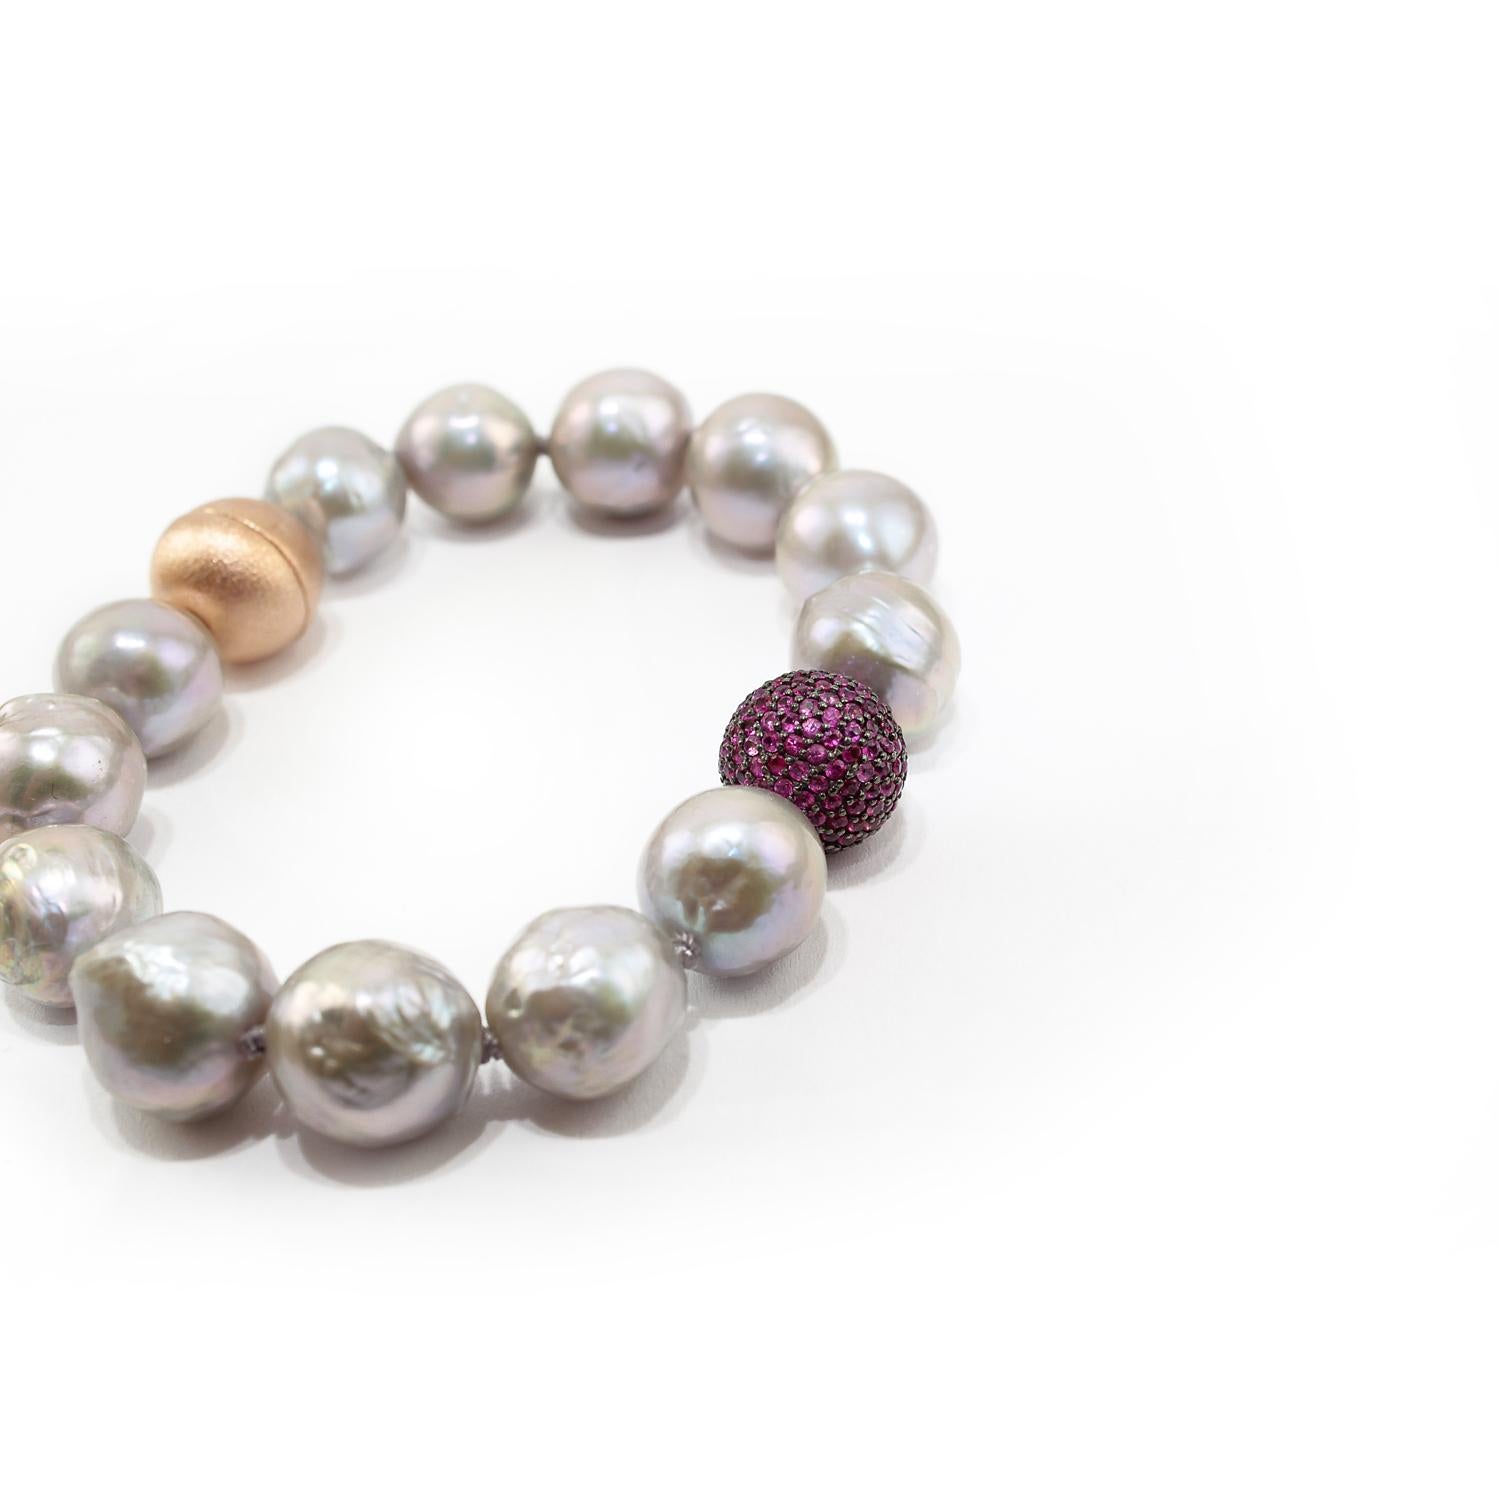 Nice bracelet made up of rubies pave on silver setting, baroque grey pearls and 925 satin silver clasp. 
Rubies pave ct. 2,26
Baroque grey pearls
925 satin pink silver clasp (magnet system)
Total lenght (including clasp) is cm 18,5